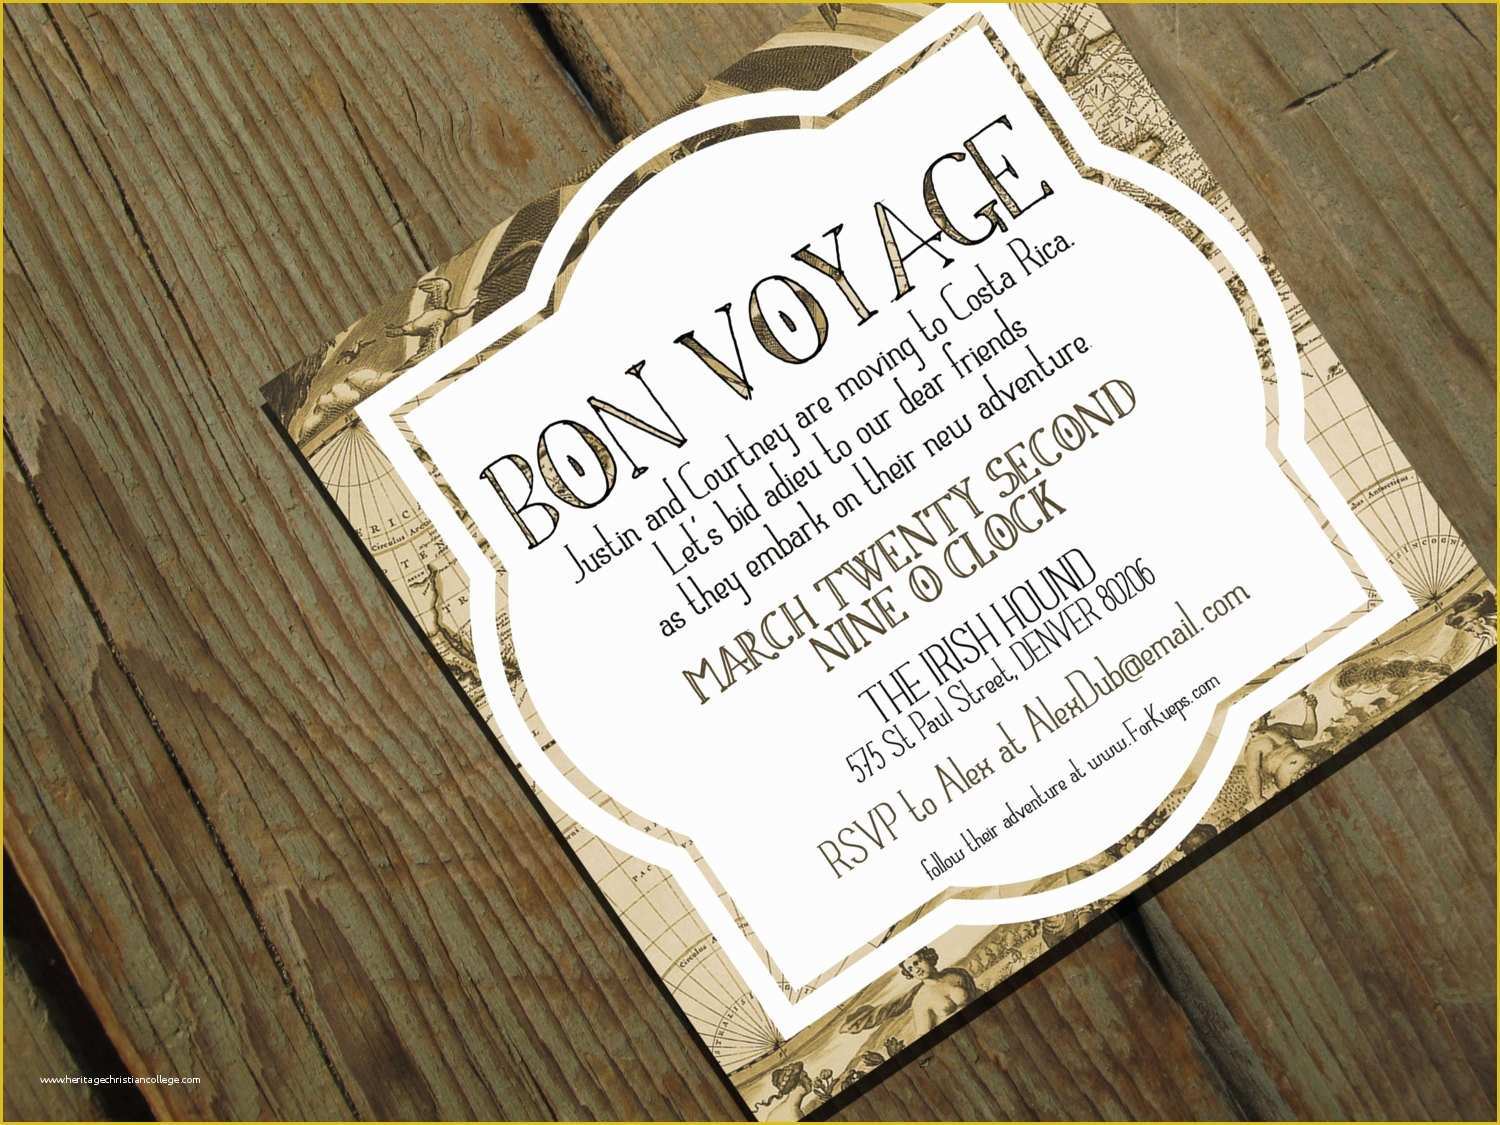 Free Printable Invitation Templates Going Away Party Of Bon Voyage Going Away Party Invitation Moving by